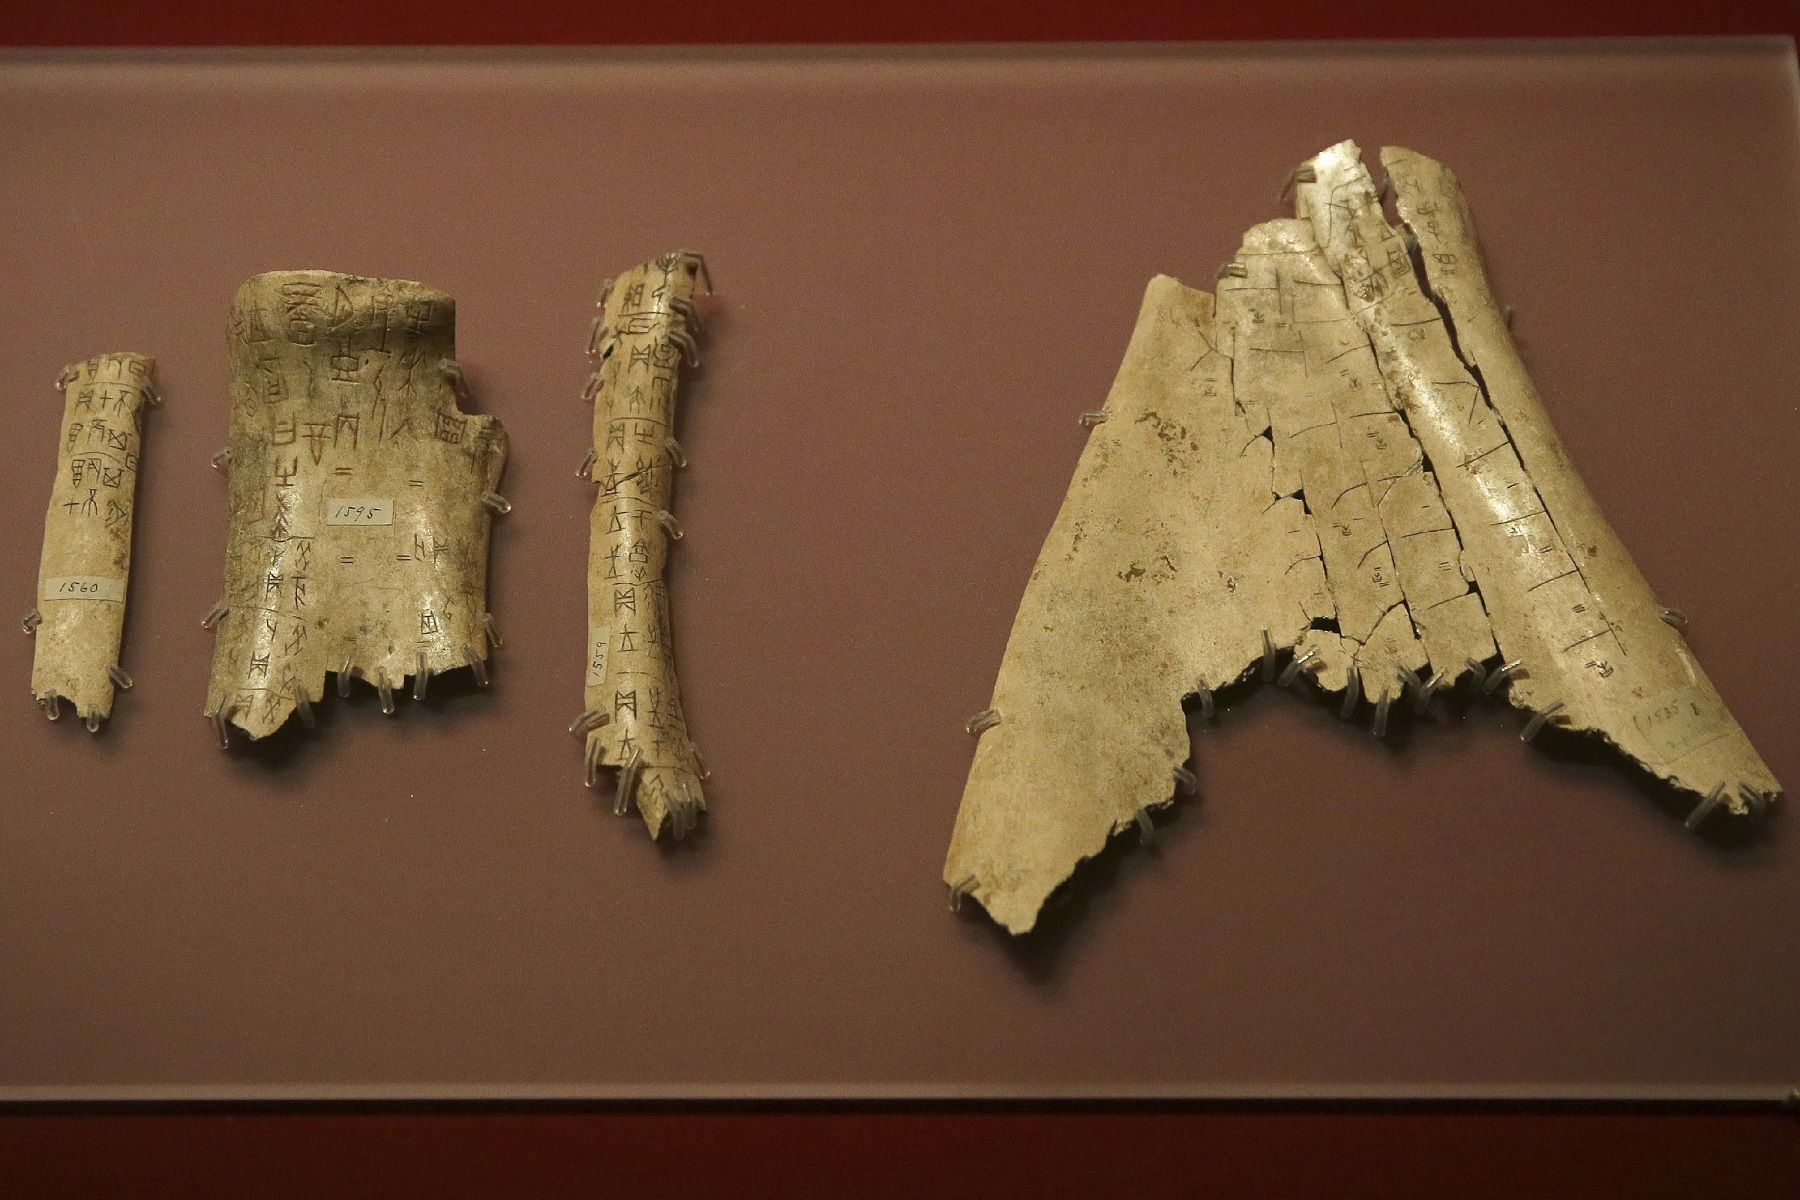 Chinese Oracle bones in the exhibition (Tim Ireland/AP)